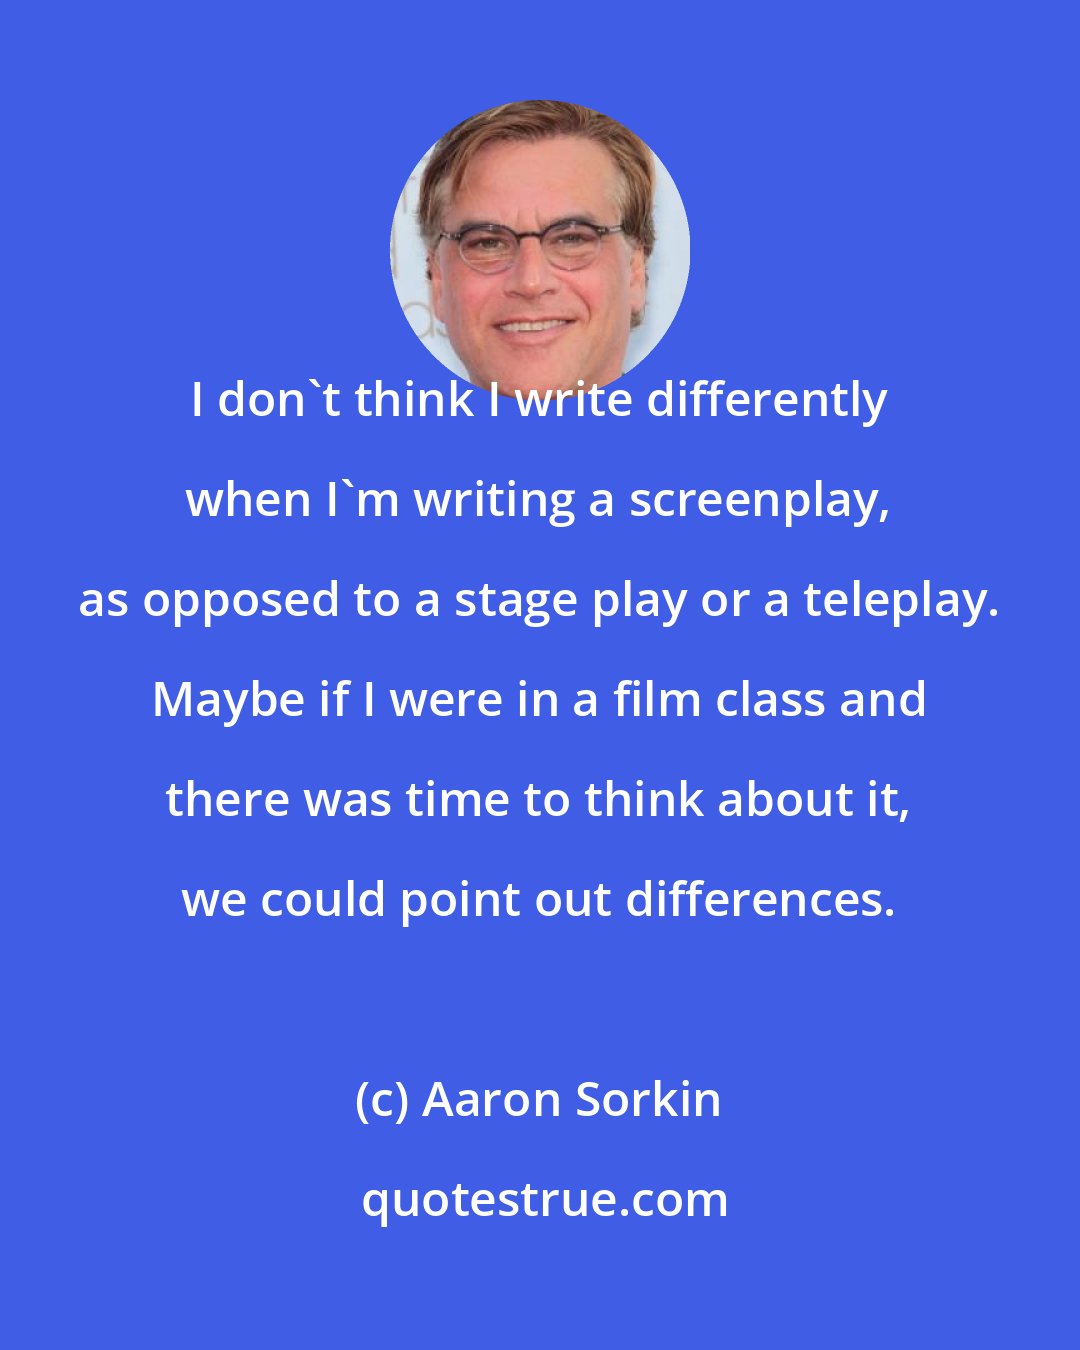 Aaron Sorkin: I don't think I write differently when I'm writing a screenplay, as opposed to a stage play or a teleplay. Maybe if I were in a film class and there was time to think about it, we could point out differences.